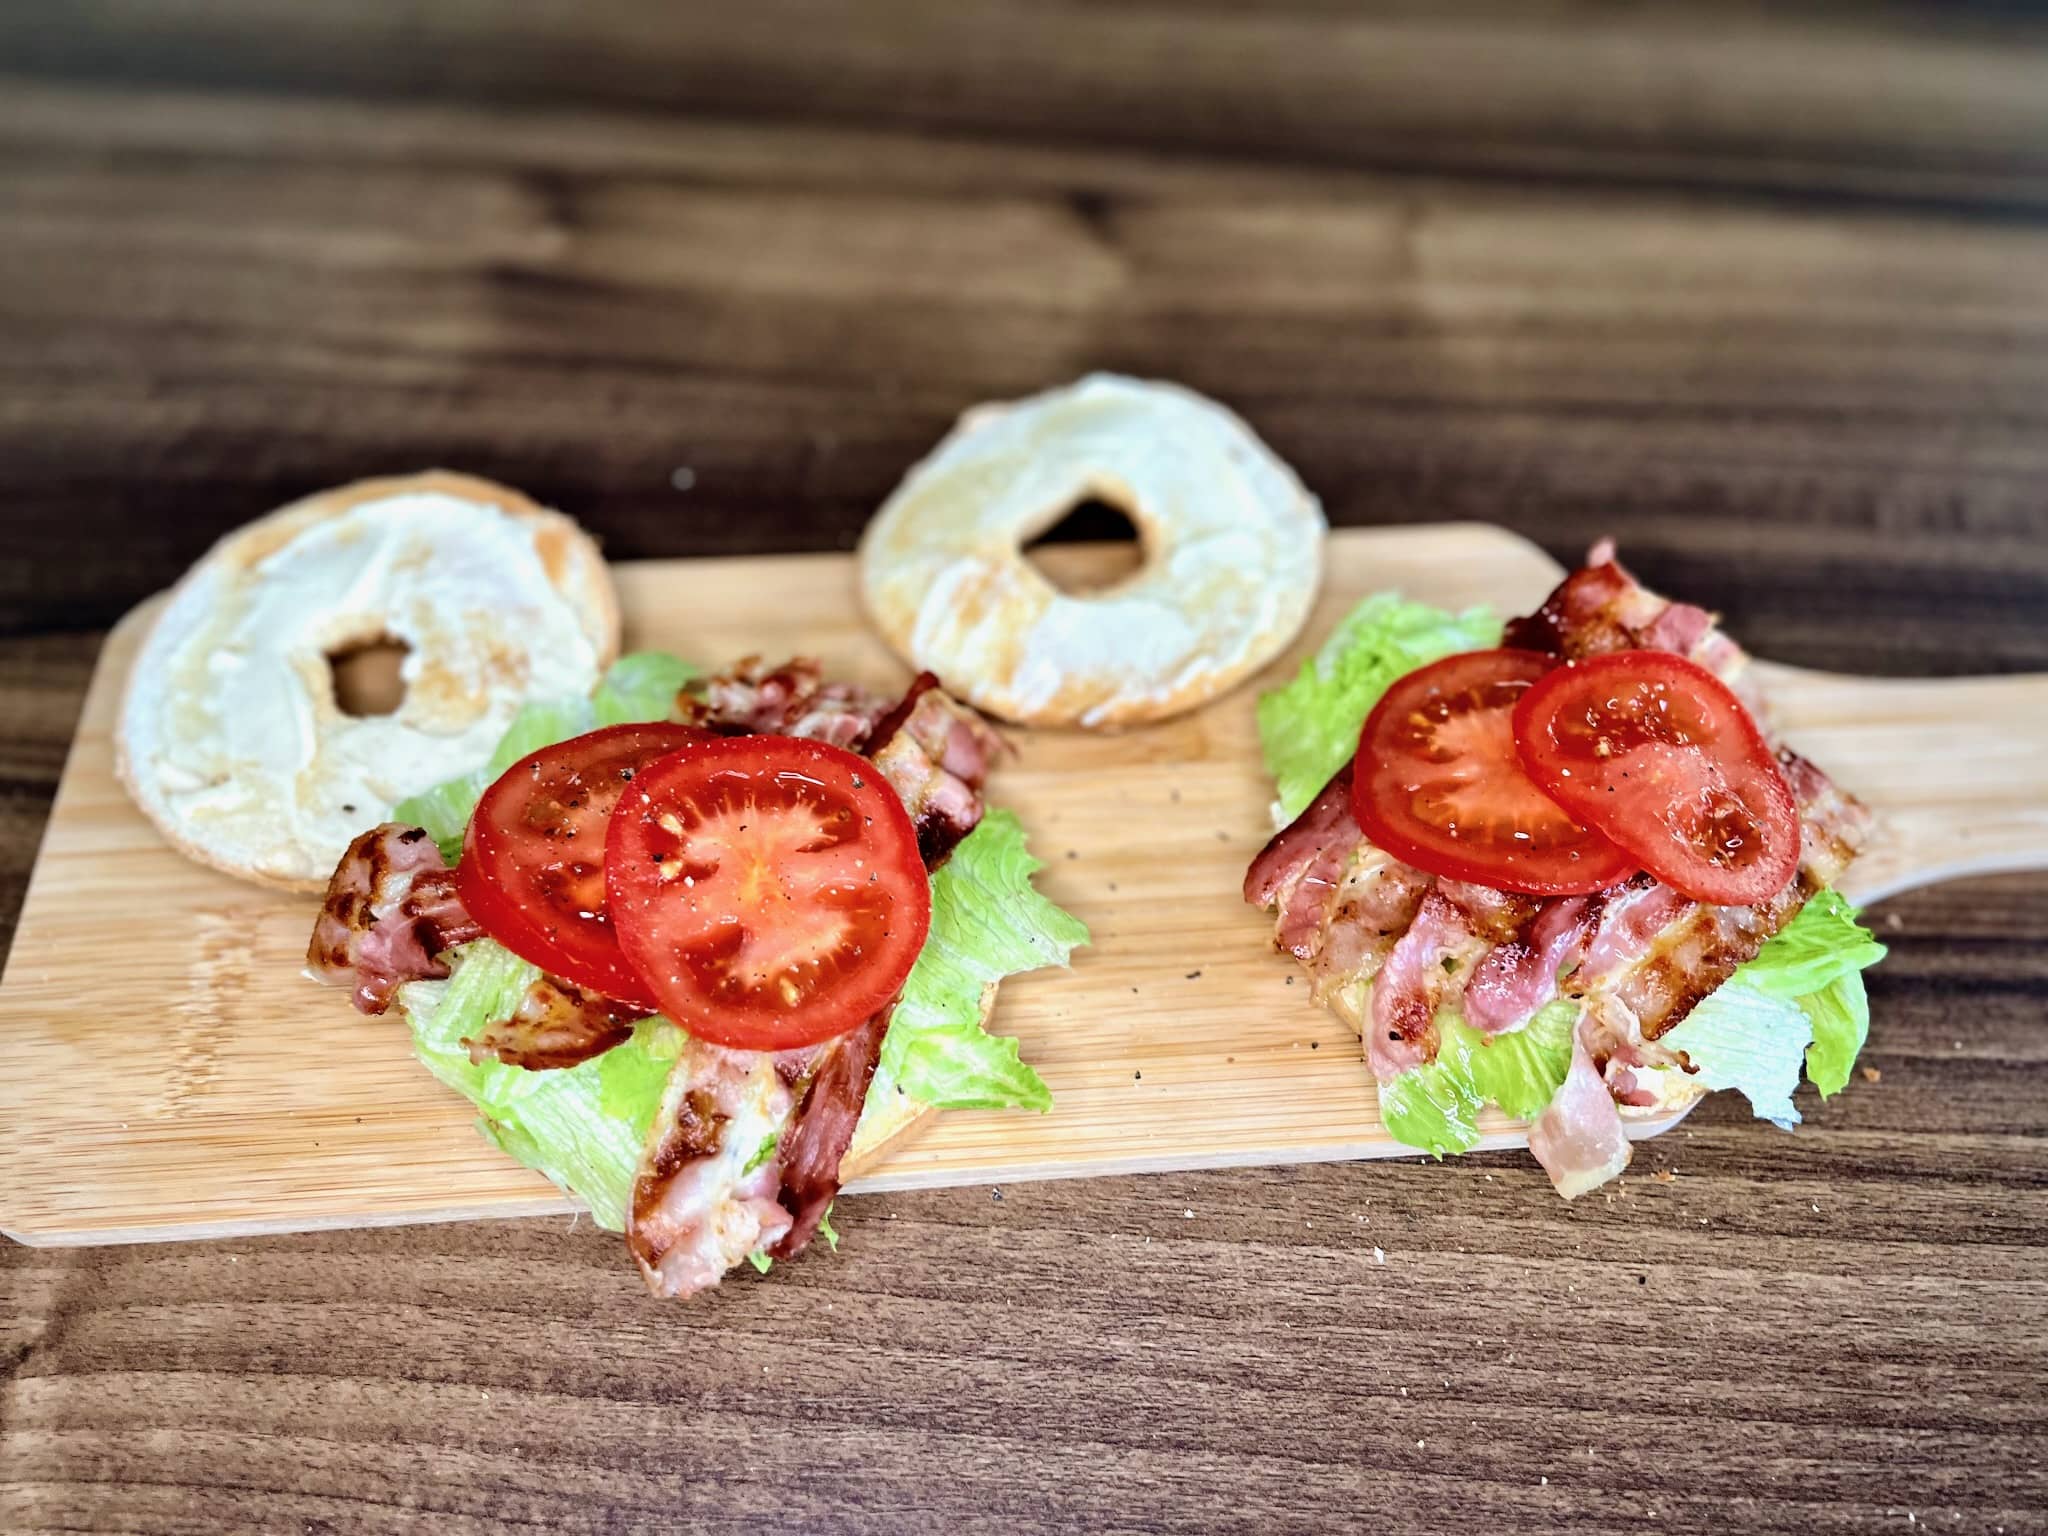 Slices of juicy tomato join the BLT party on toasted bagels, sprinkled with freshly ground black pepper